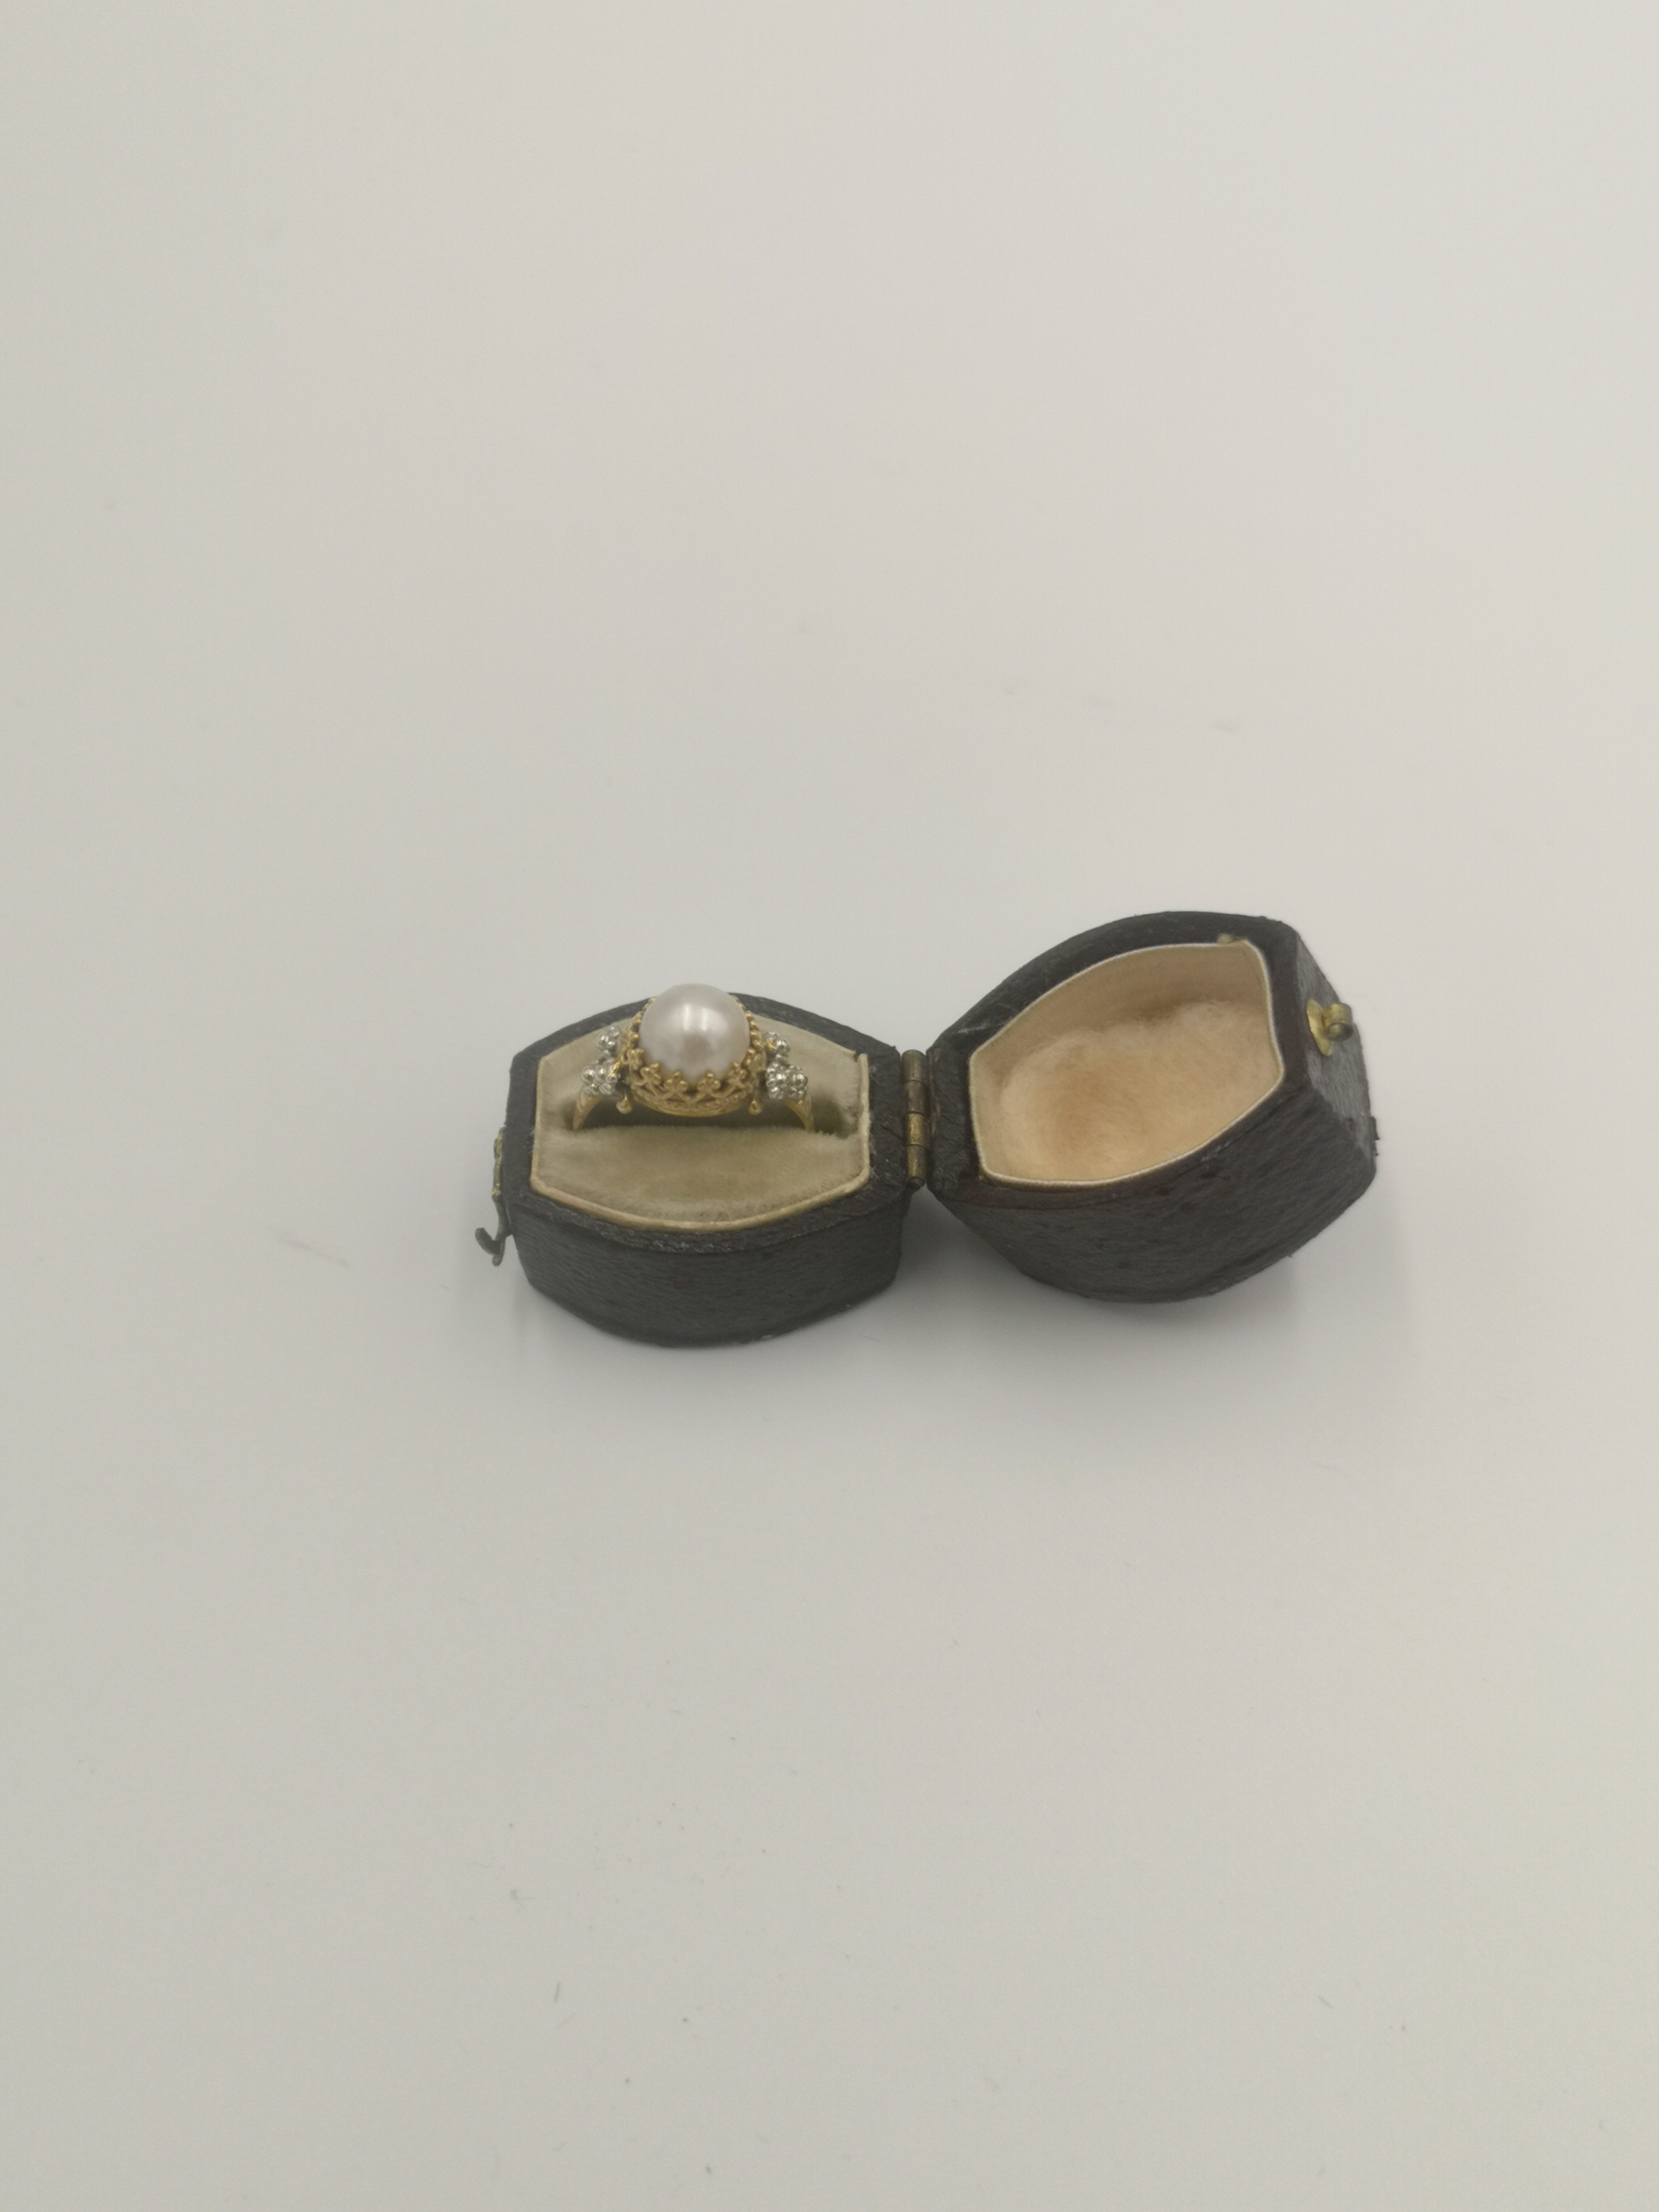 18ct gold ring set with a pearl - Image 5 of 5